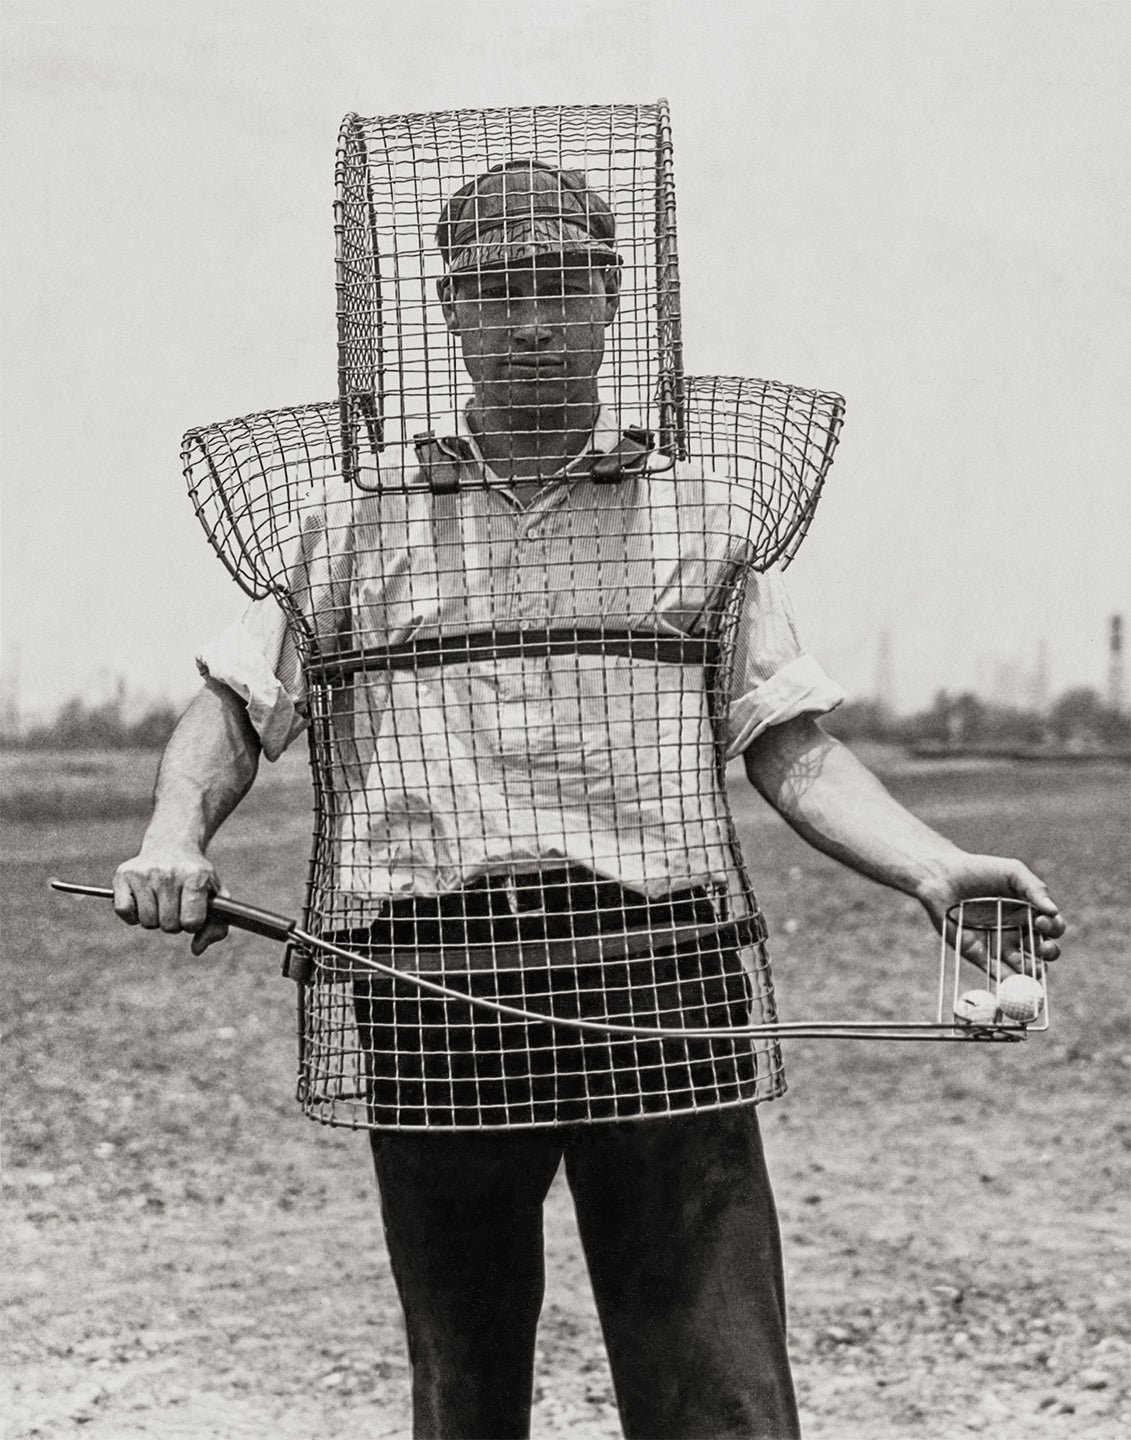 Caged Golf Caddy, 1920s Historical Pix